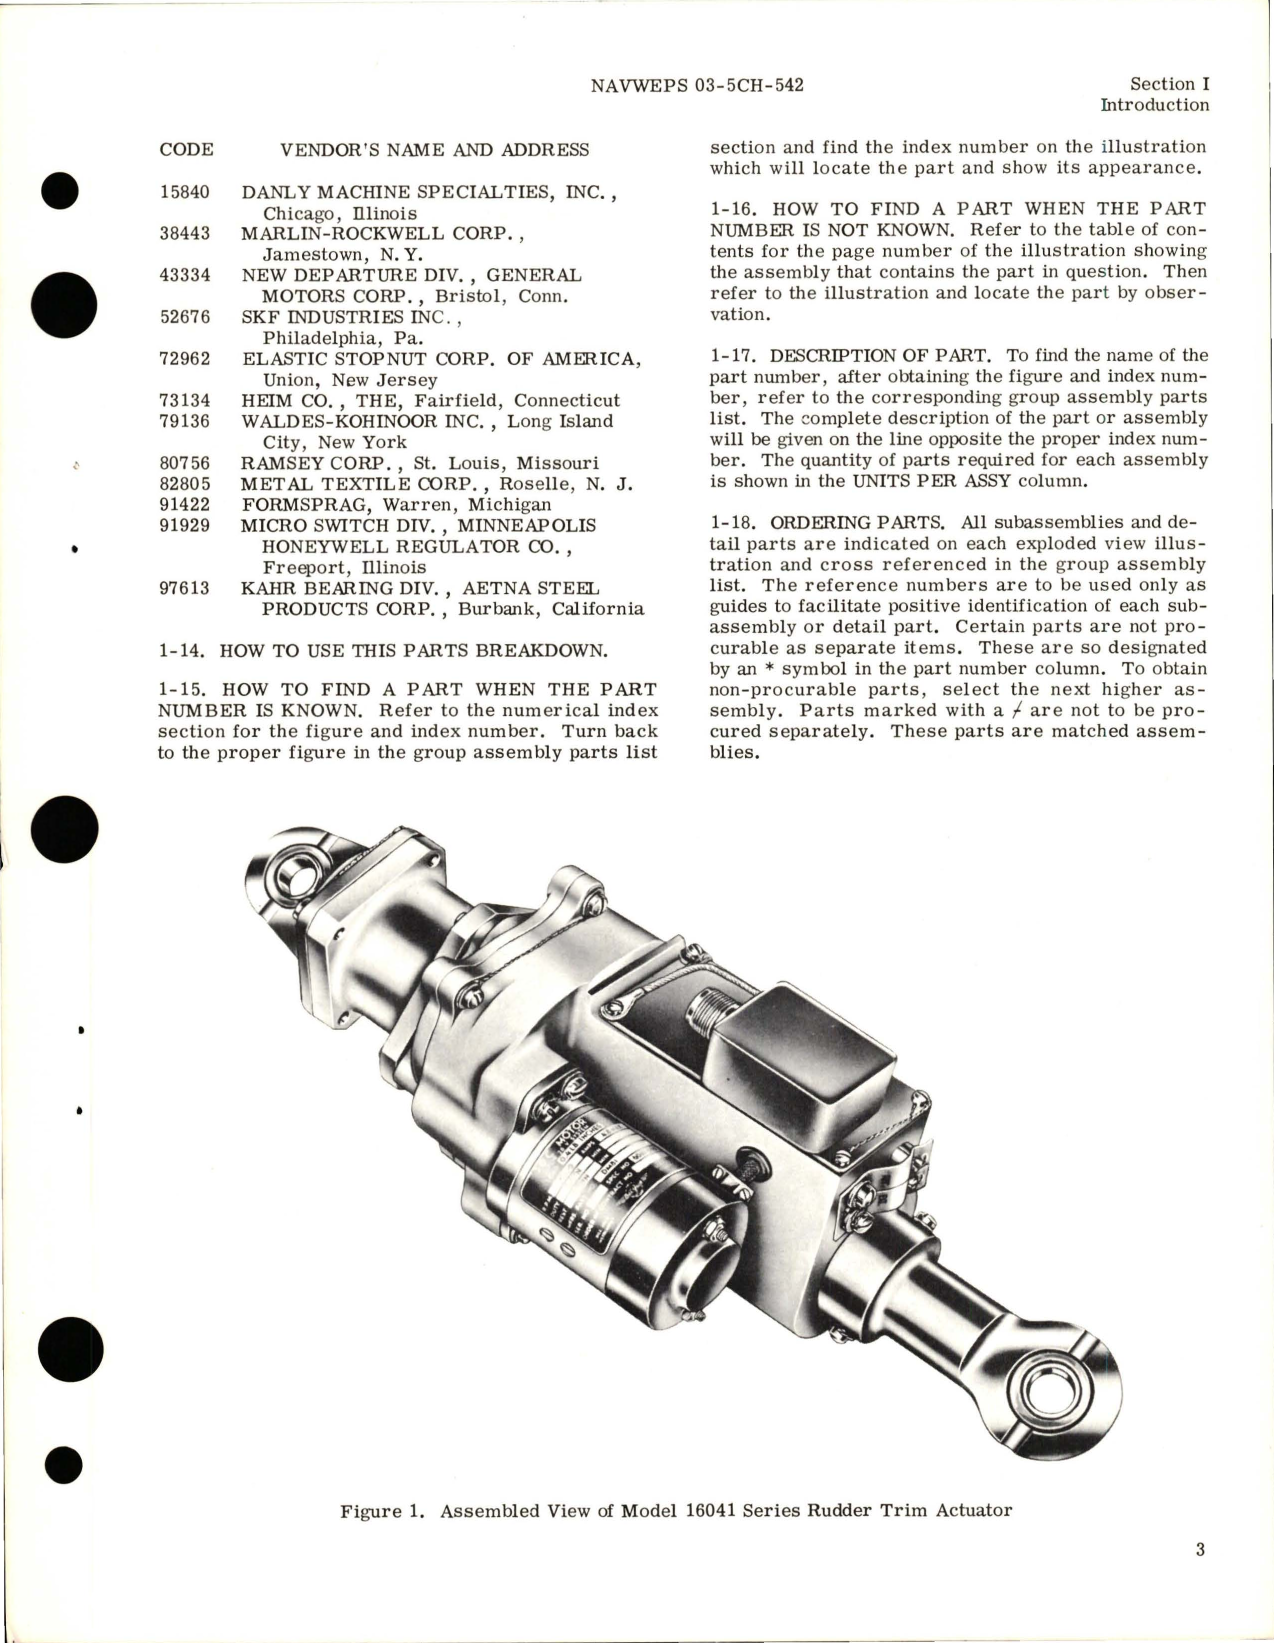 Sample page 5 from AirCorps Library document: Illustrated Parts Breakdown for Rudder Trim Actuator - Models 16041A, 41B, 41C 